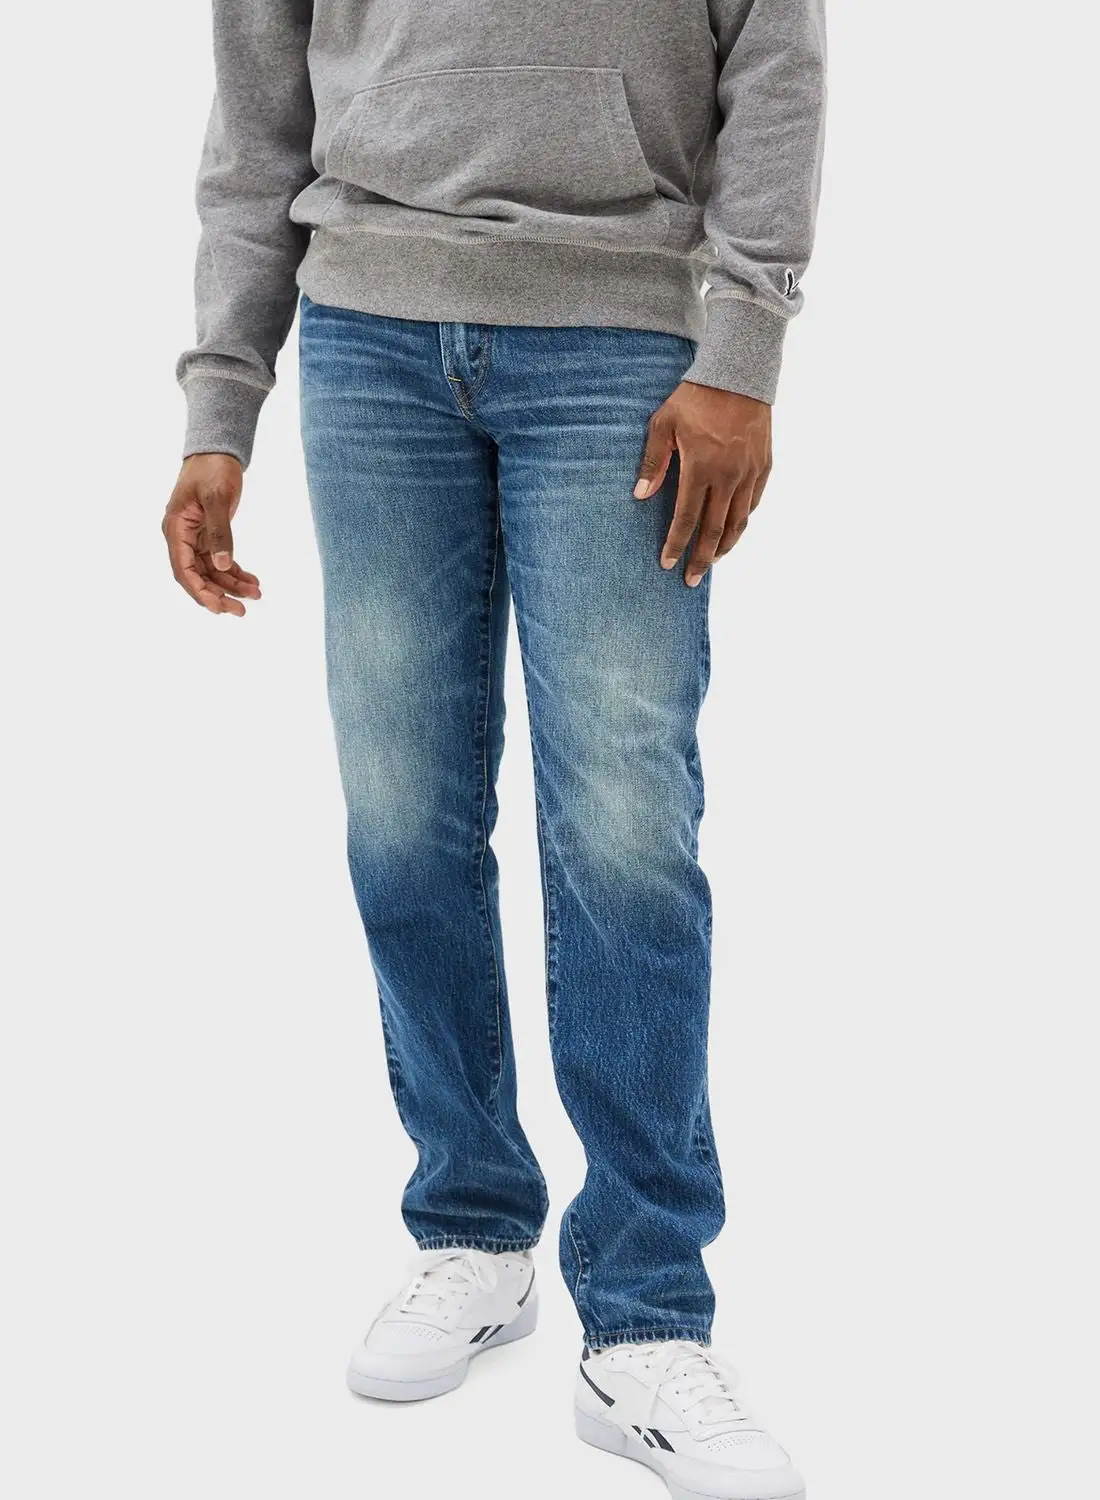 American Eagle Rinse Wash Straight Fit Jeans